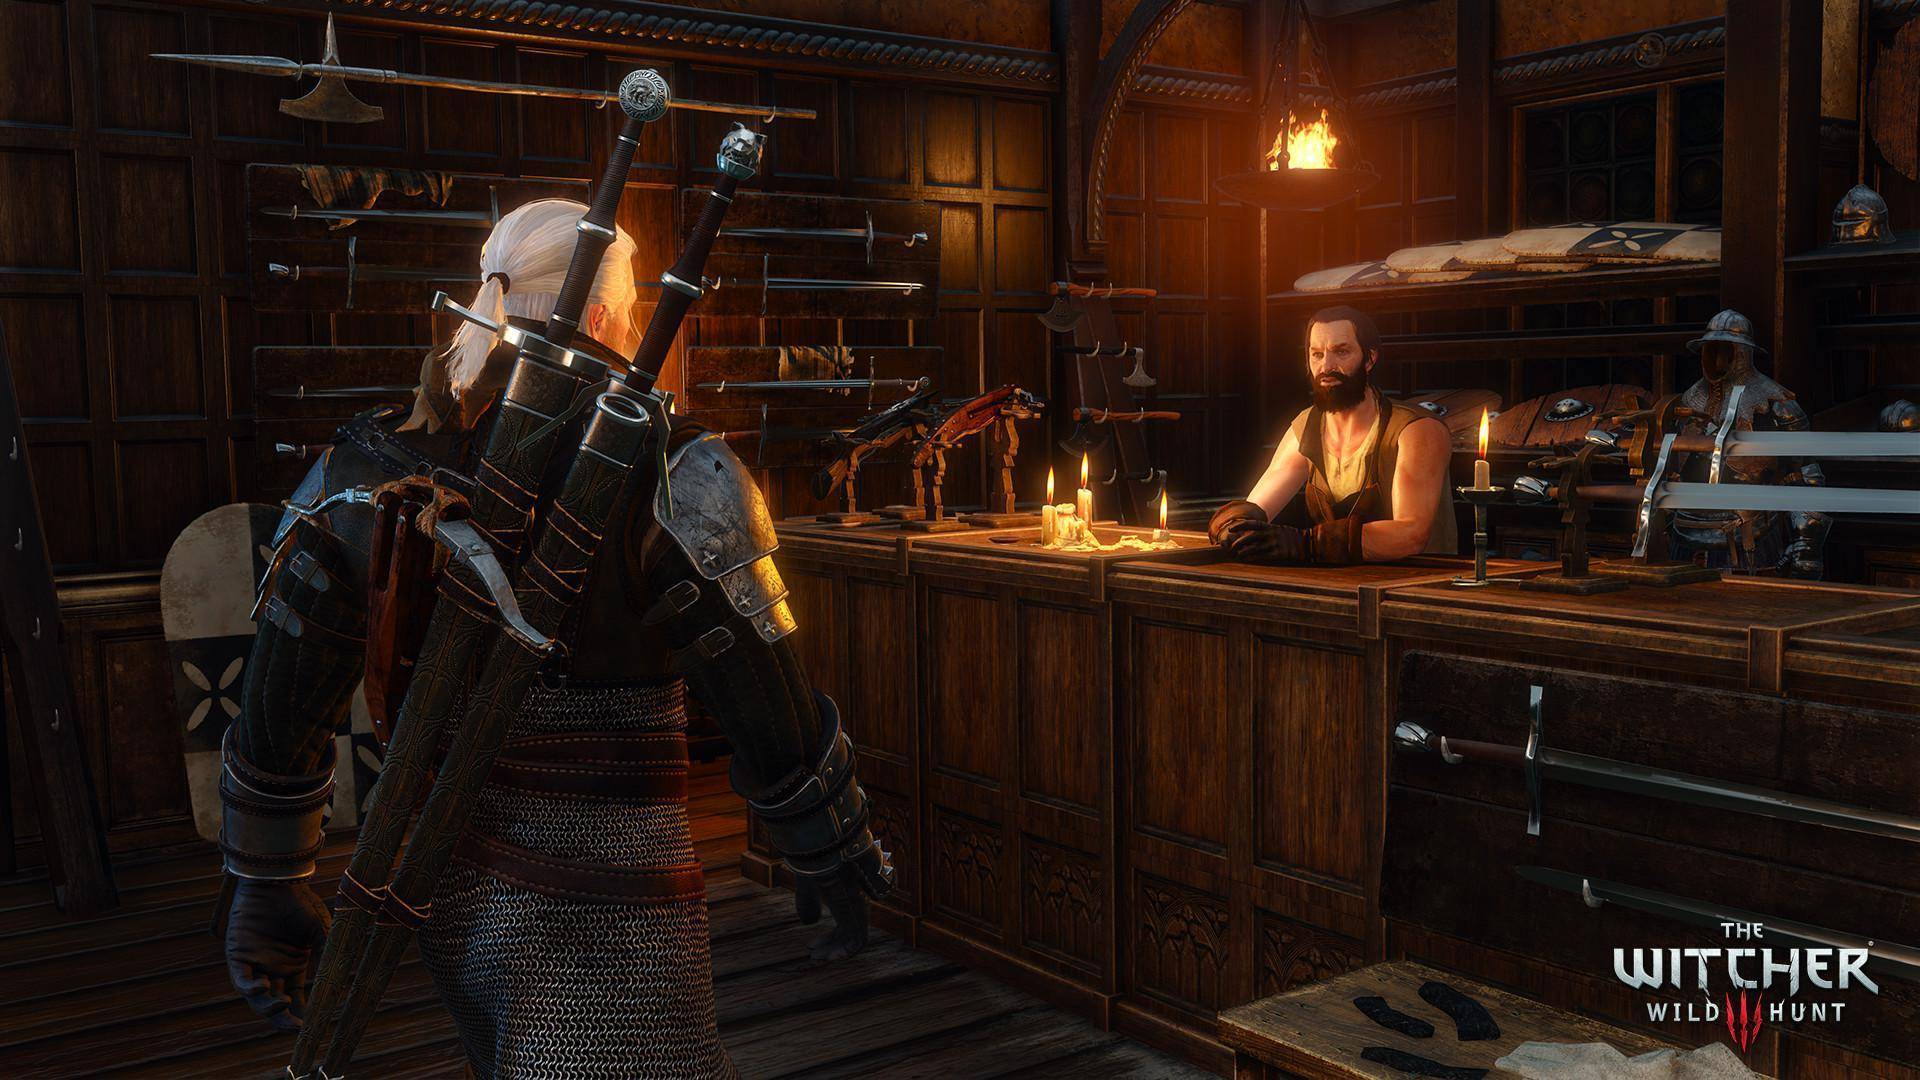 Witcher 3 wild hunt system requirements